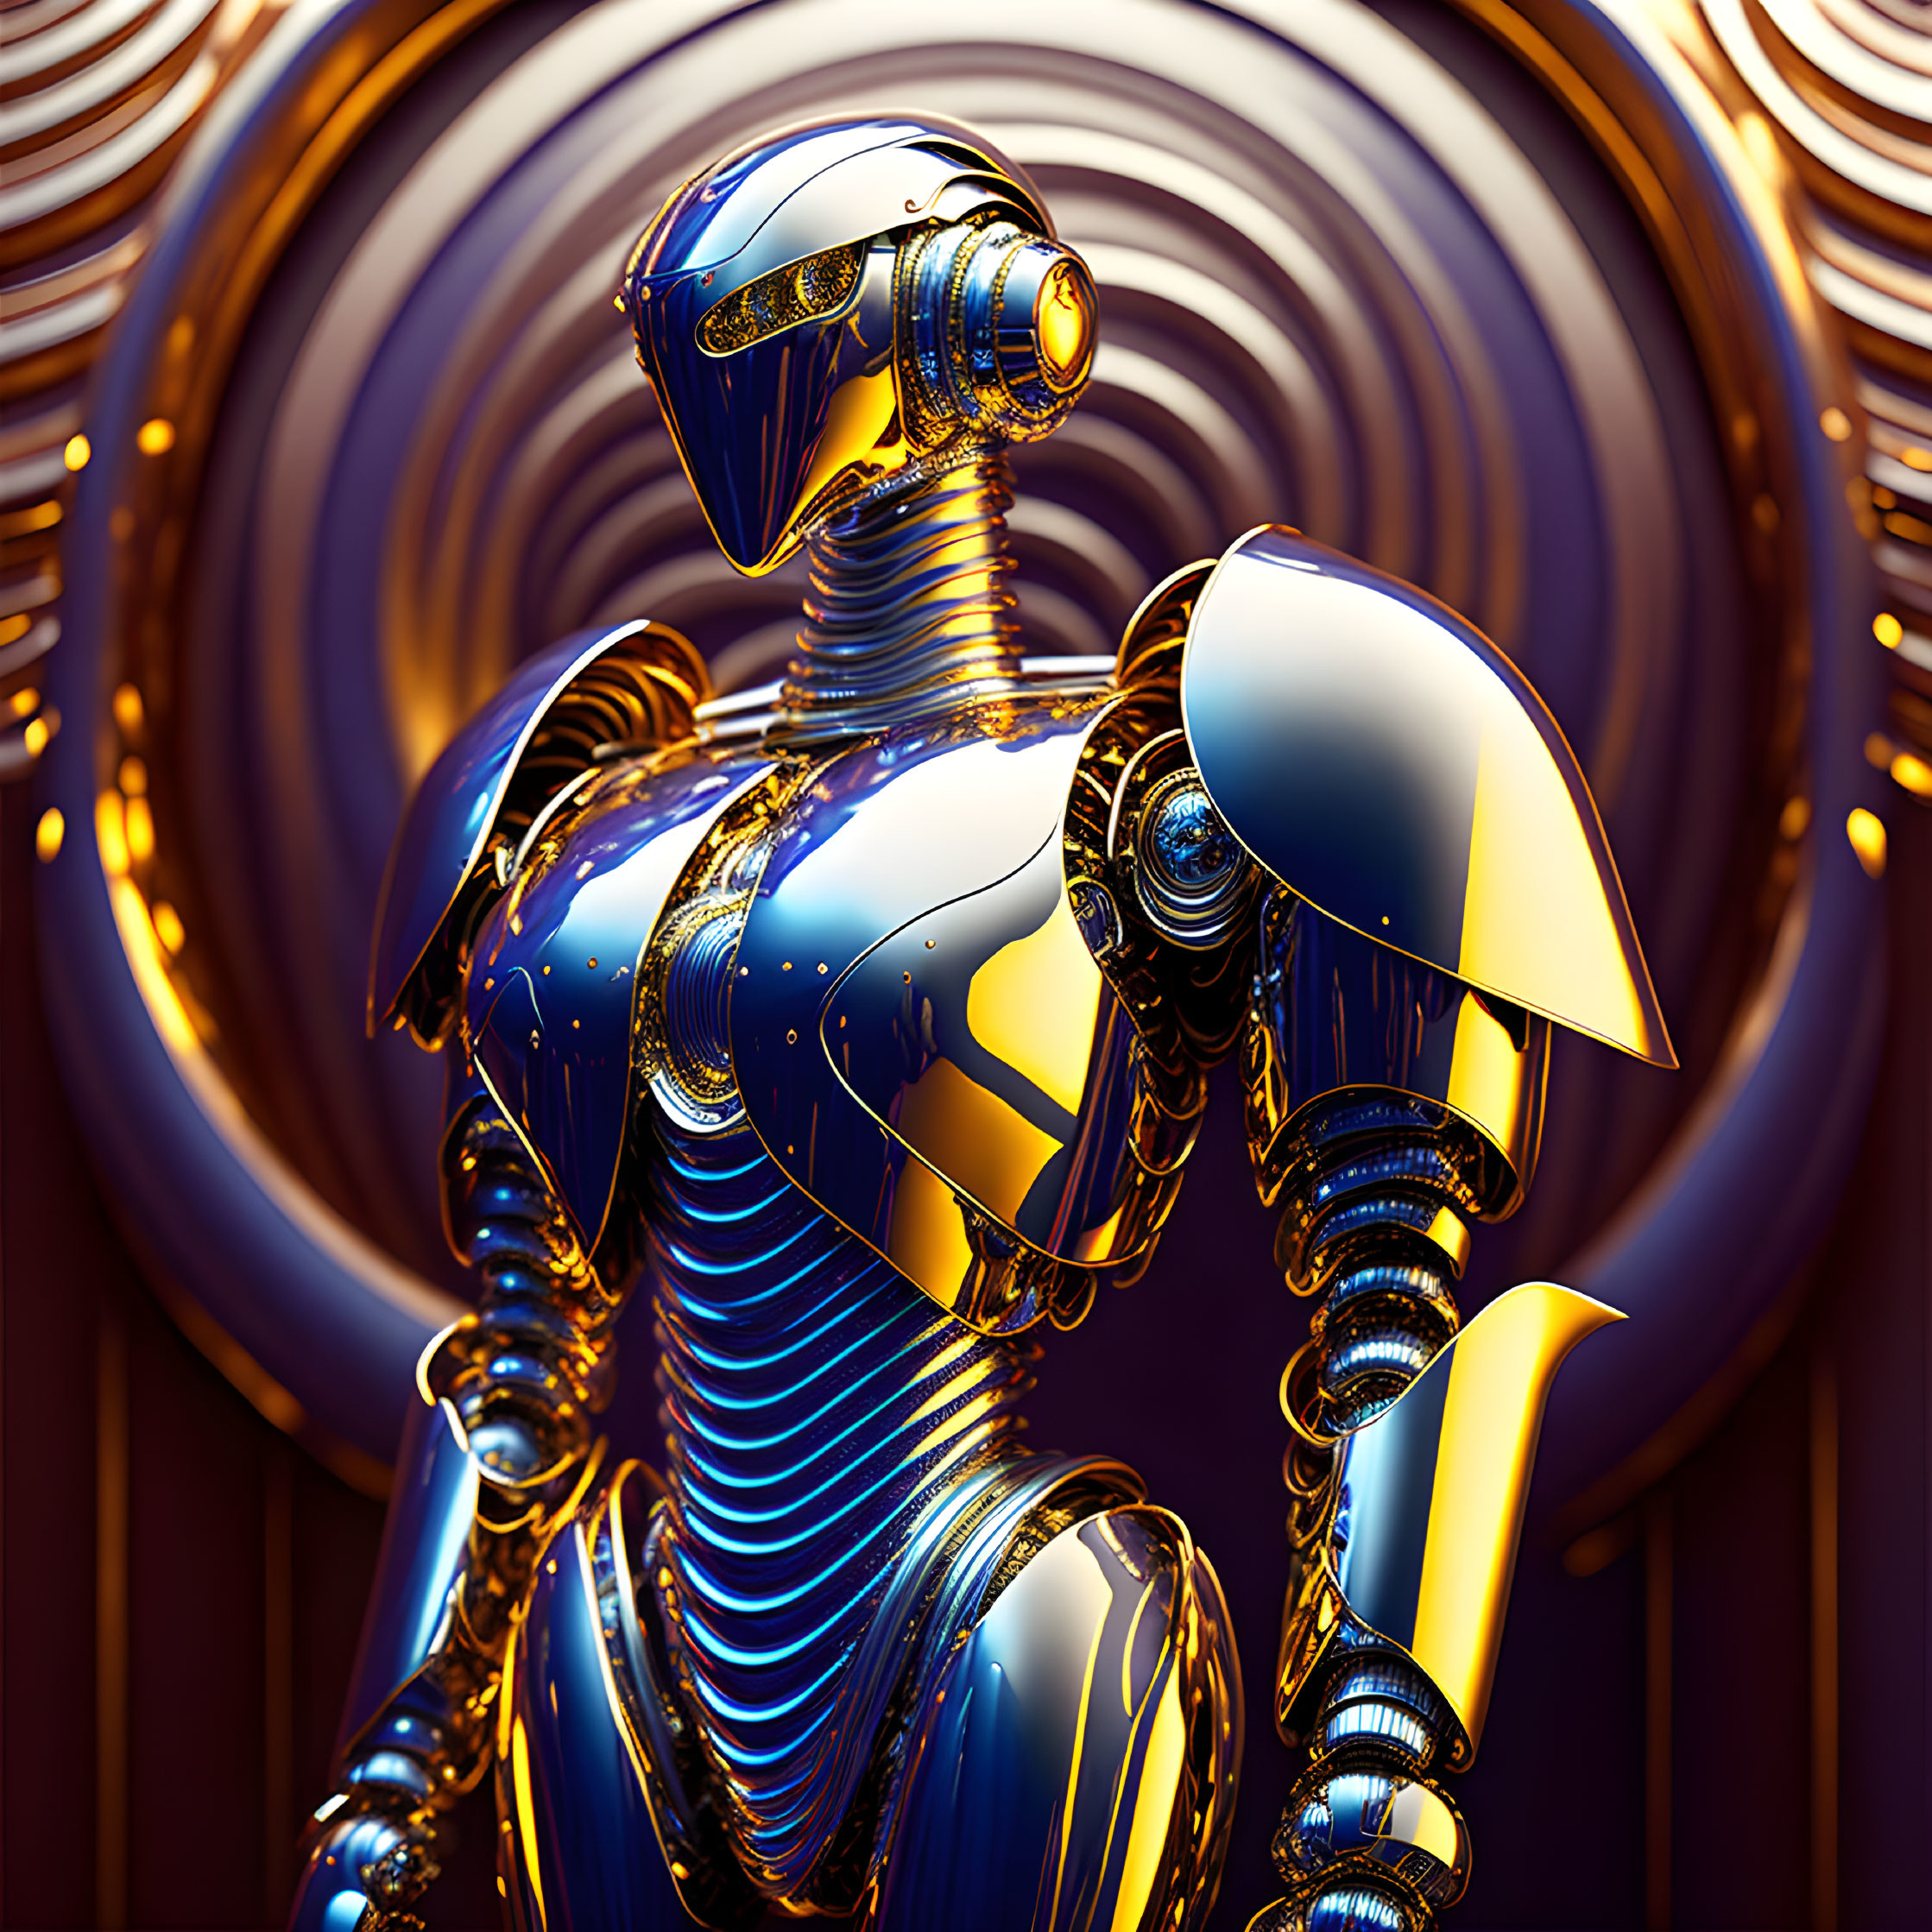 Futuristic blue and gold robot on swirling metallic background